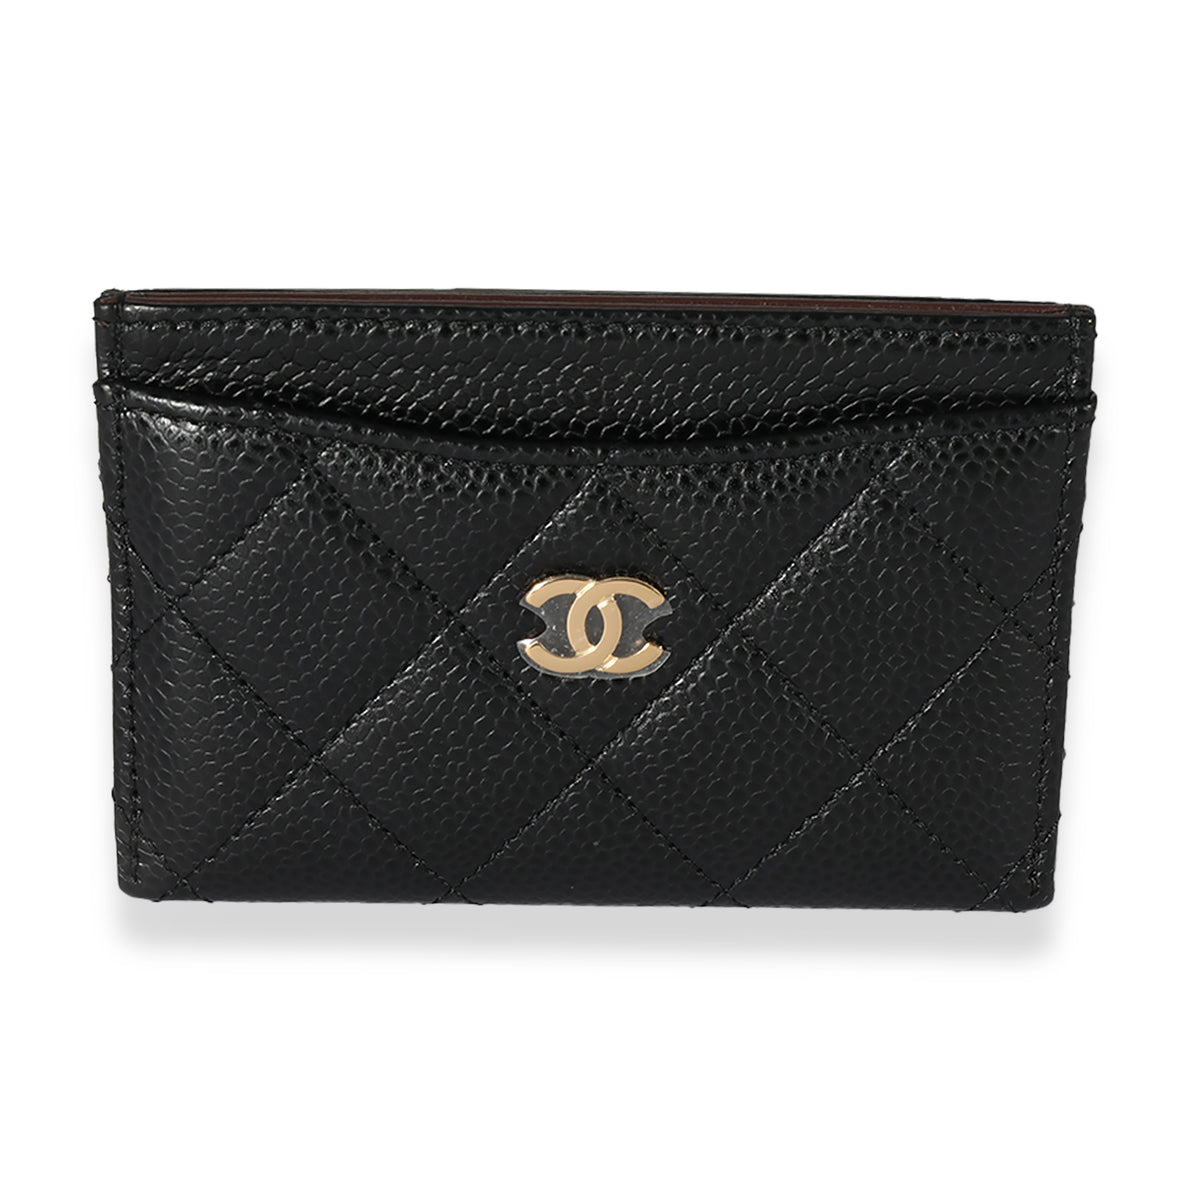 CHANEL Caviar Quilted Golden Class Phone Holder Black 251730